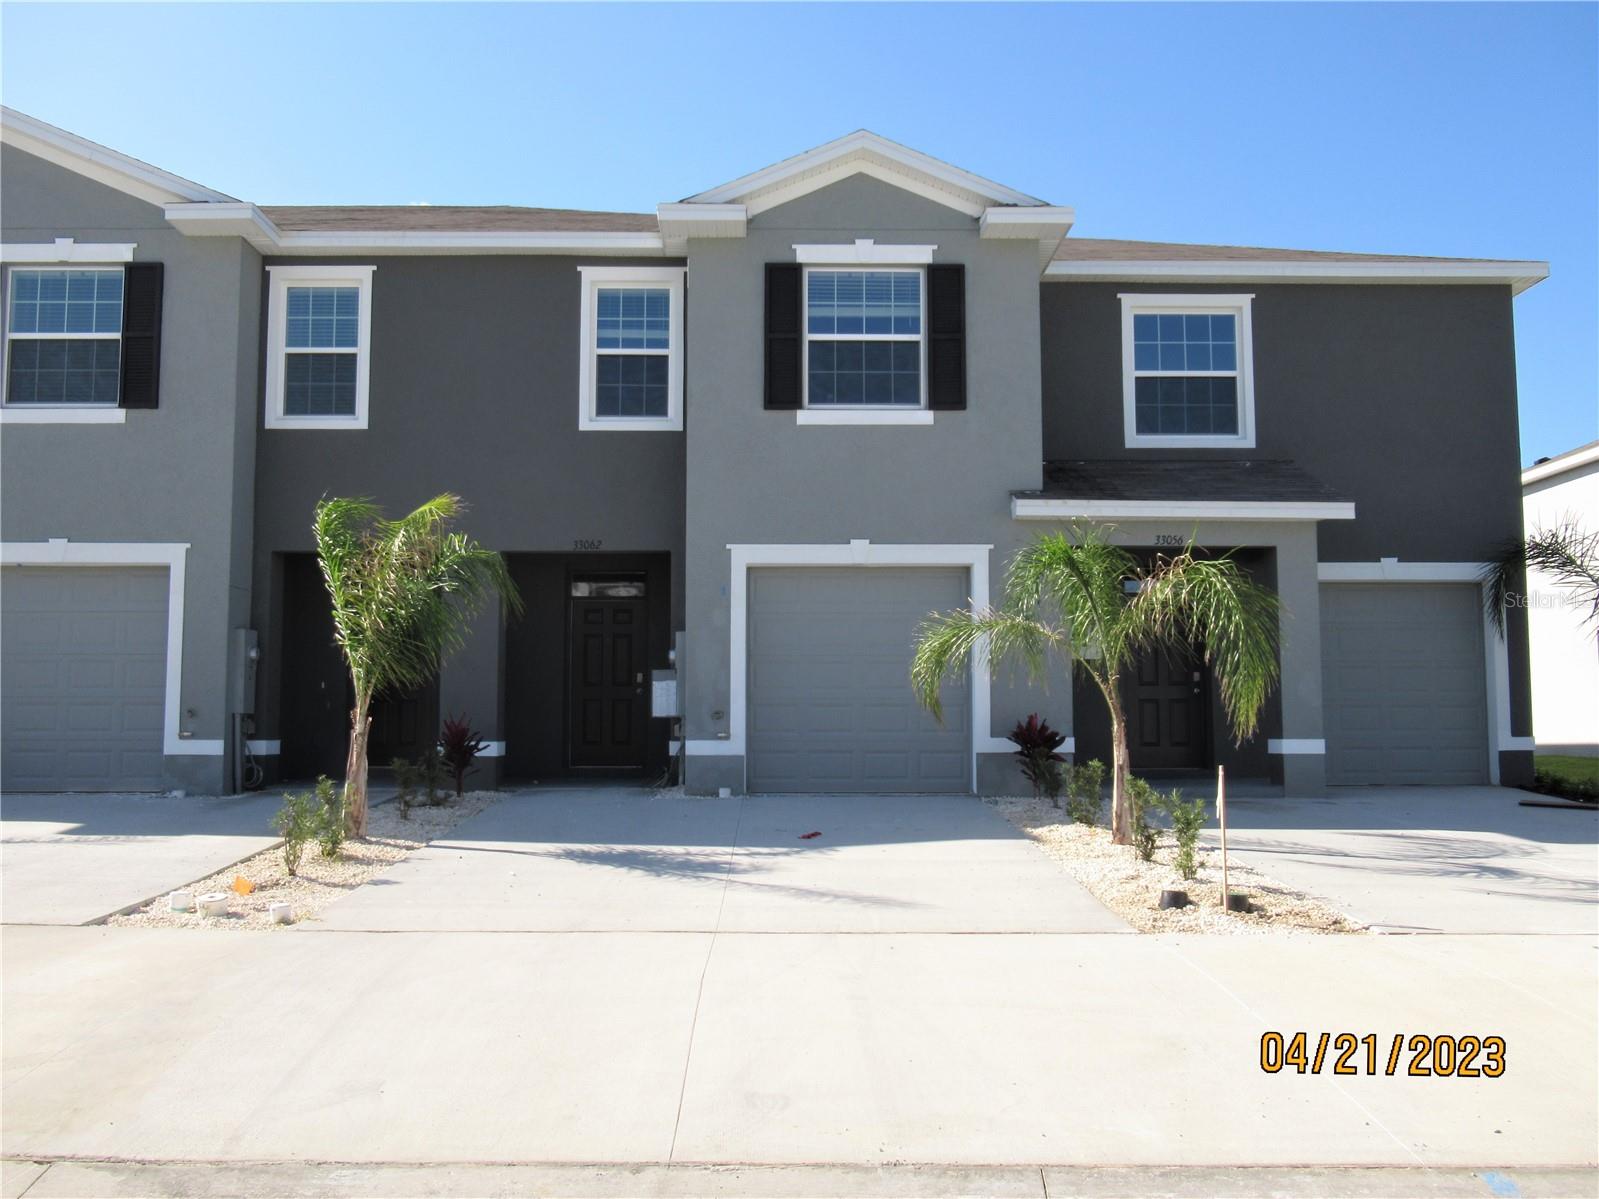 View WESLEY CHAPEL, FL 33545 townhome